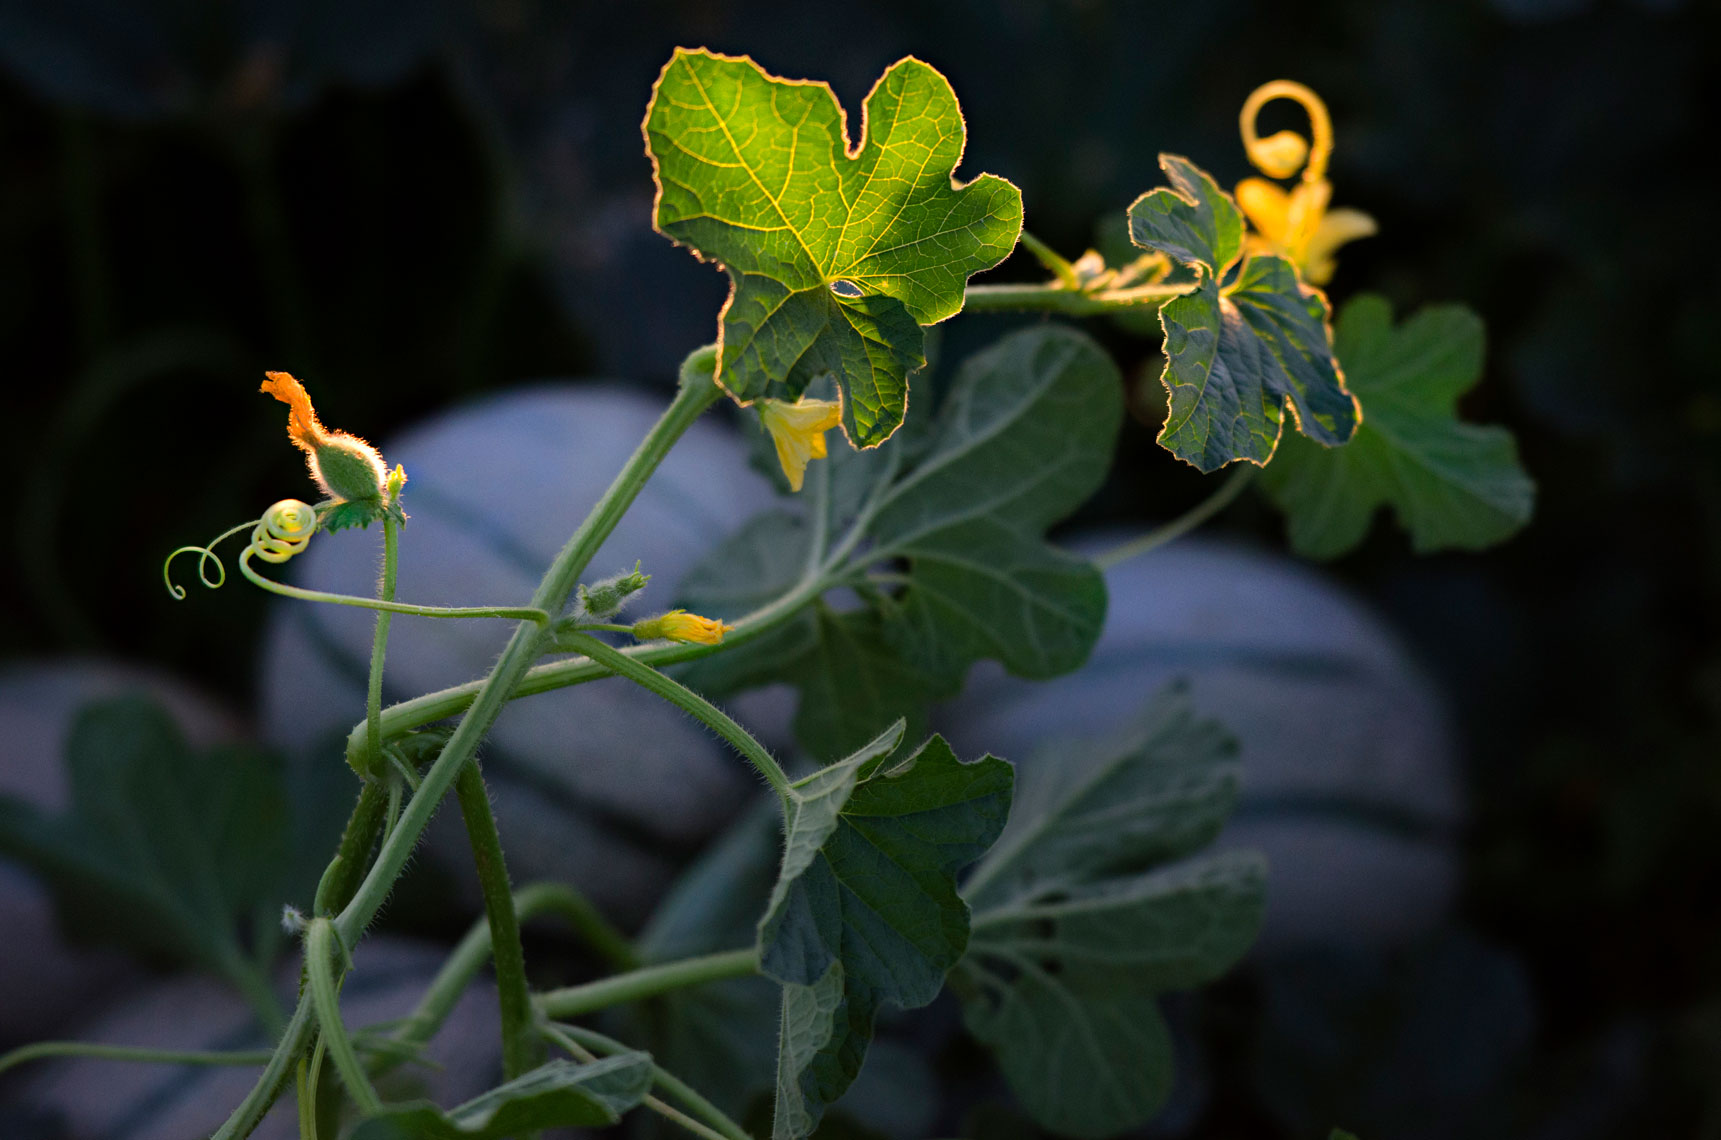 Charentais-French-Melon-in-the-field-at-sunset-wirh-melon-flower-by-produce-photographer-Joe-Atlas.